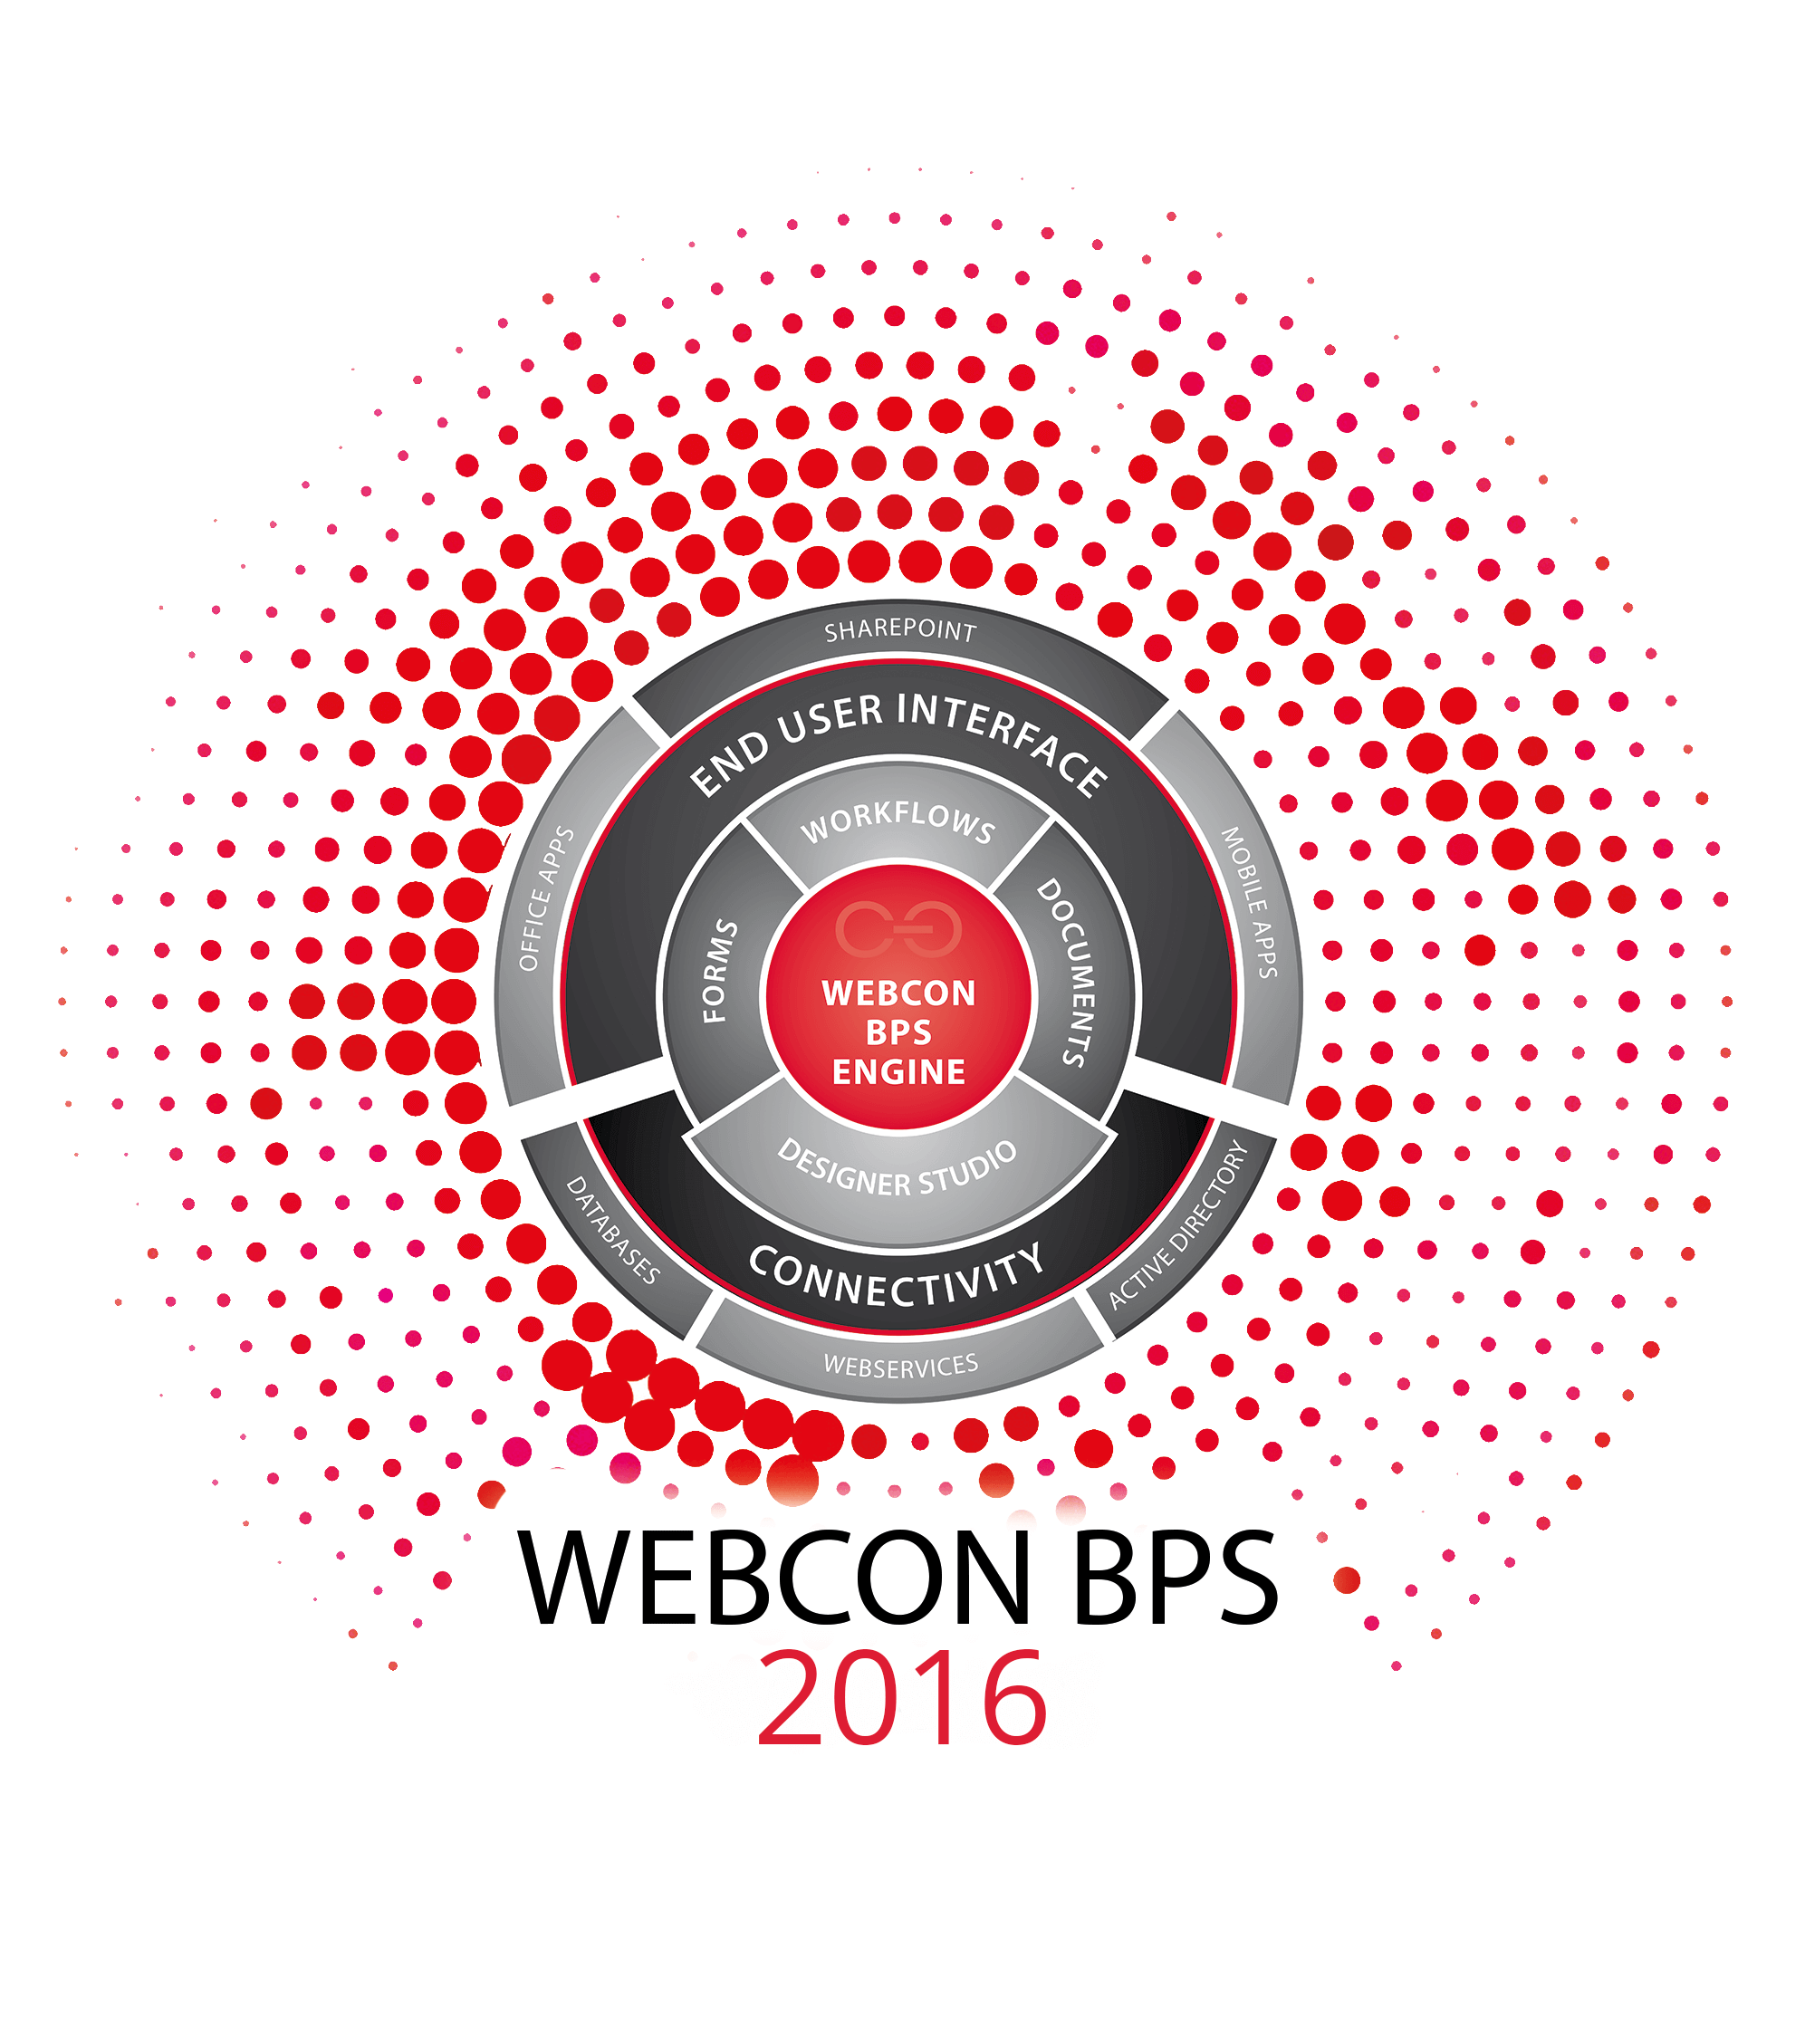 WEBCON BPS 2016 now available & introducing yet more superpowers for SP SUPERHEROES